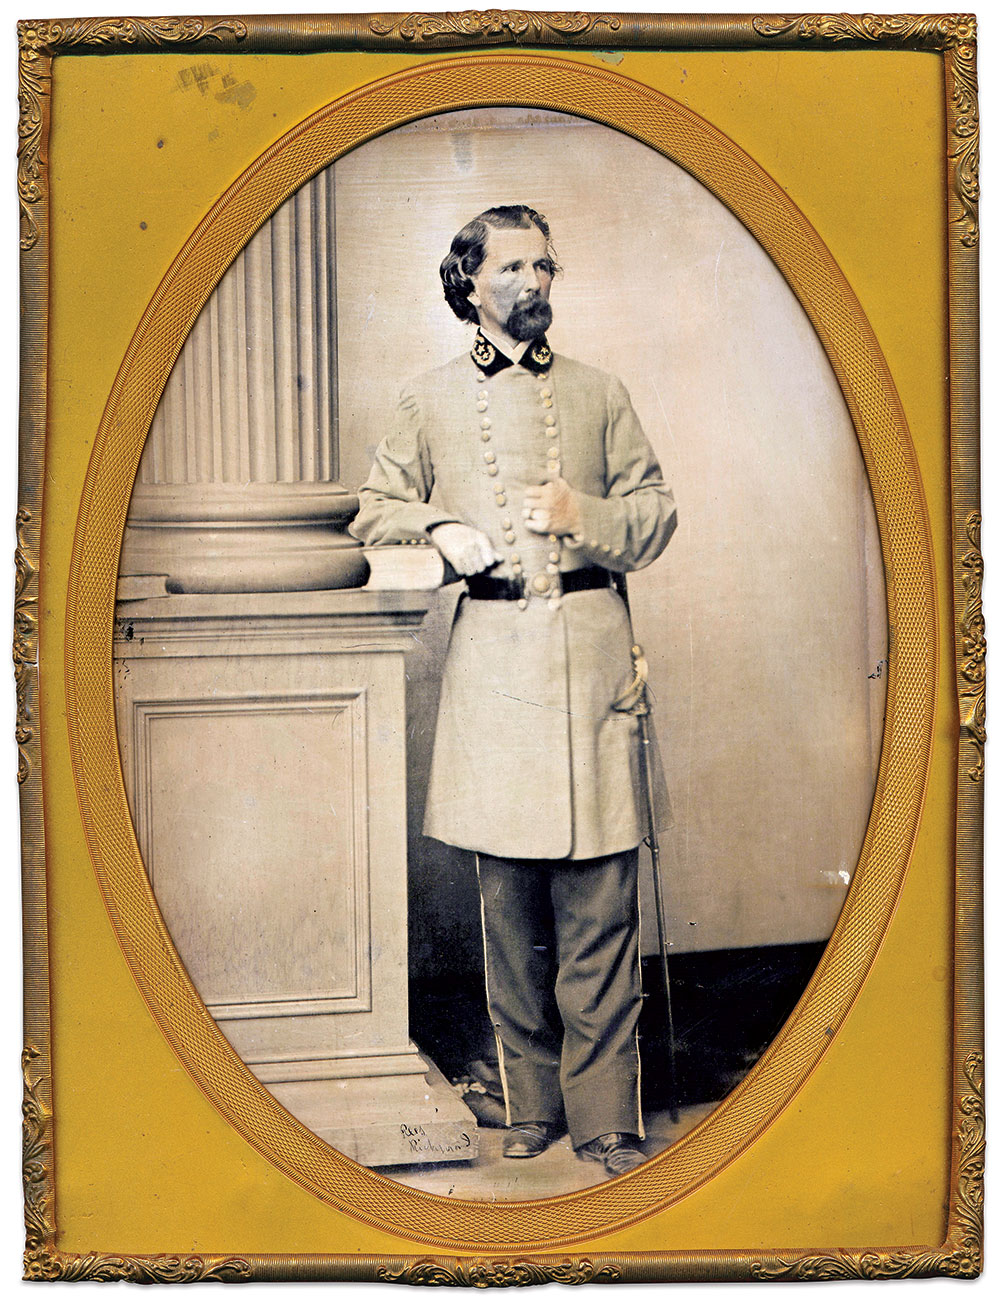 Brigadier General Lloyd Tilghman of Maryland stood for his portrait in the late summer of 1862. The Rees signature is in its usual spot along the base of the column with the uncommon addition of “Richmond.” Tilghman’s military career had been marred by controversy at forts Donelson and Henry earlier in 1862. Trying to save his command from almost sure destruction, he abandoned the forts and attempted to break out of Brig. Gen. Ulysses S. Grant’s siege. The attempt failed, and the federals captured Tilghman and most of his men. Held at Fort Warren in Boston Harbor, Tilghman was exchanged in August 1862 for Union Maj. Gen. John F. Reynolds who had been captured at Gaines’ Mill. Neither of these brave adversaries survived beyond 1863. Reynolds died on the field at Gettysburg and Tilghman at the Battle of Champion Hill. While directing a battery in the heat of an artillery duel, Tilghman reportedly remarked, “I think they are trying to spoil my new uniform.” Suddenly, a solid shot passed through his body nearly cutting it in two. He was 47. Full plate ambrotype, signed. Richard Ferry Collection.